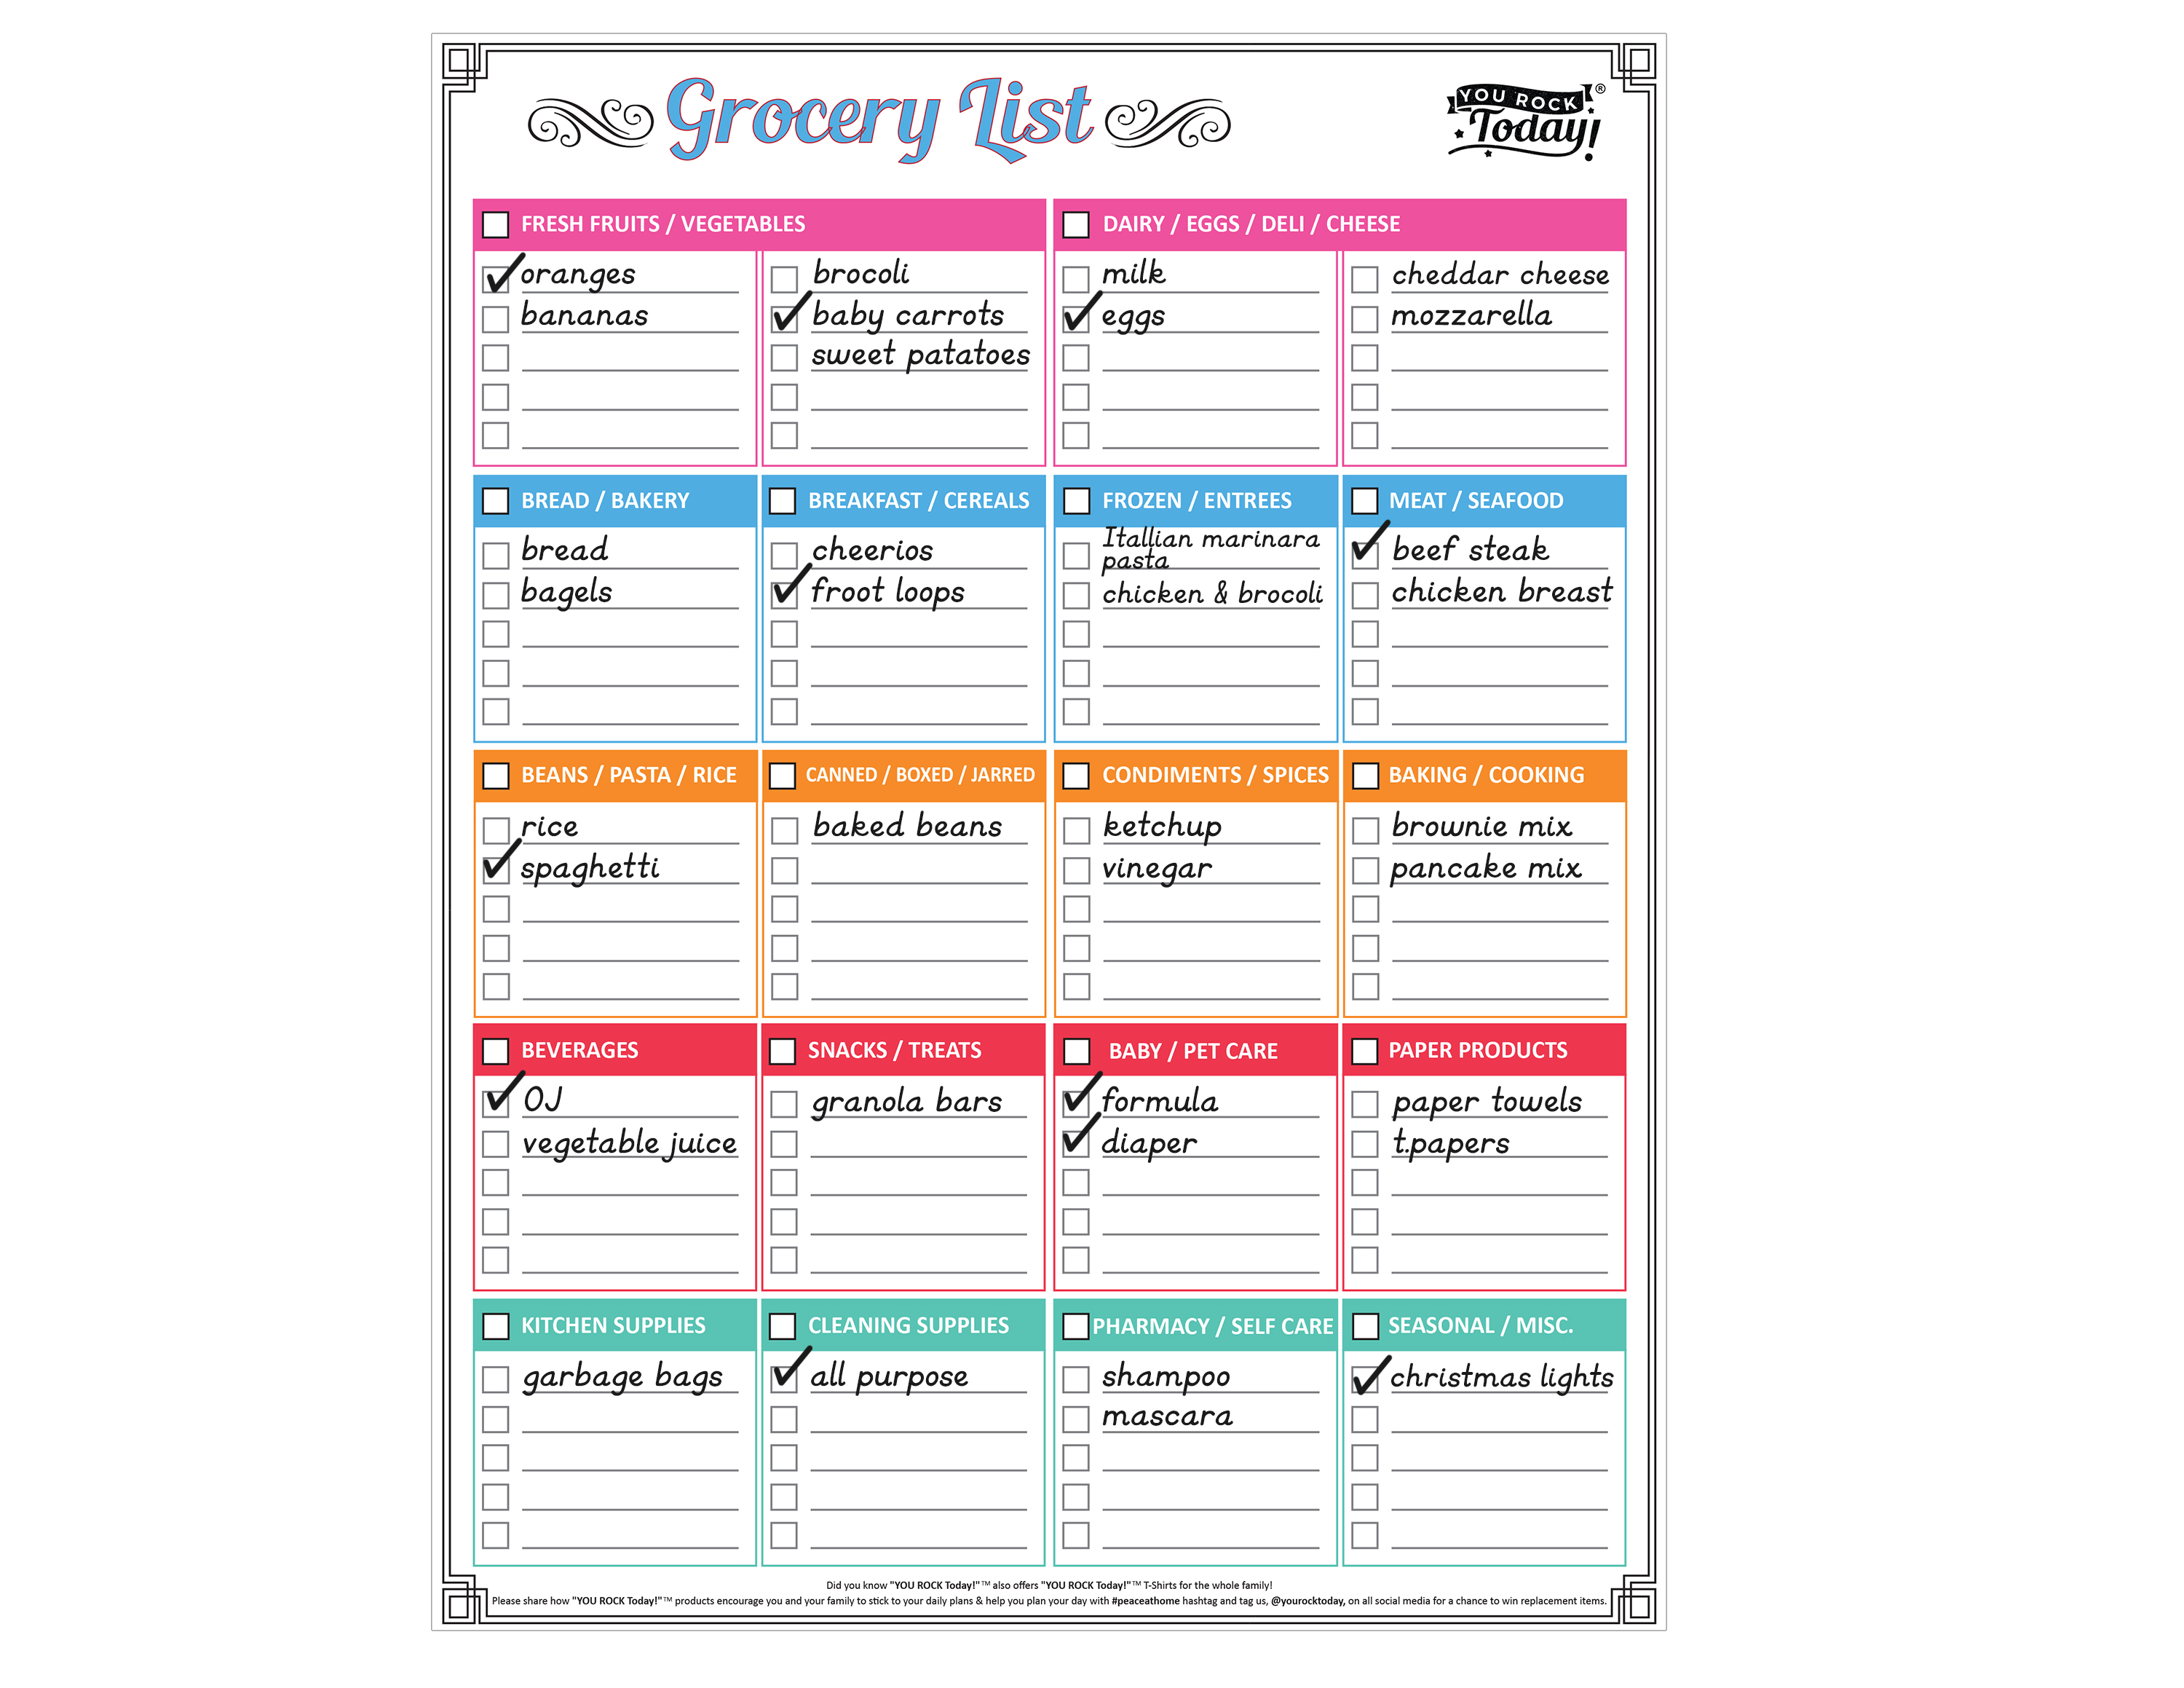 Dry Erase Magnetic Monthly Calendar 17” x 13” and Grocery List – Strong Magnet Backing + 8 Free Fine Tip Magnetic Markers & Large Eraser – Whiteboard Planner Fridge Calendar for Home, Office & School… - image 2 of 9